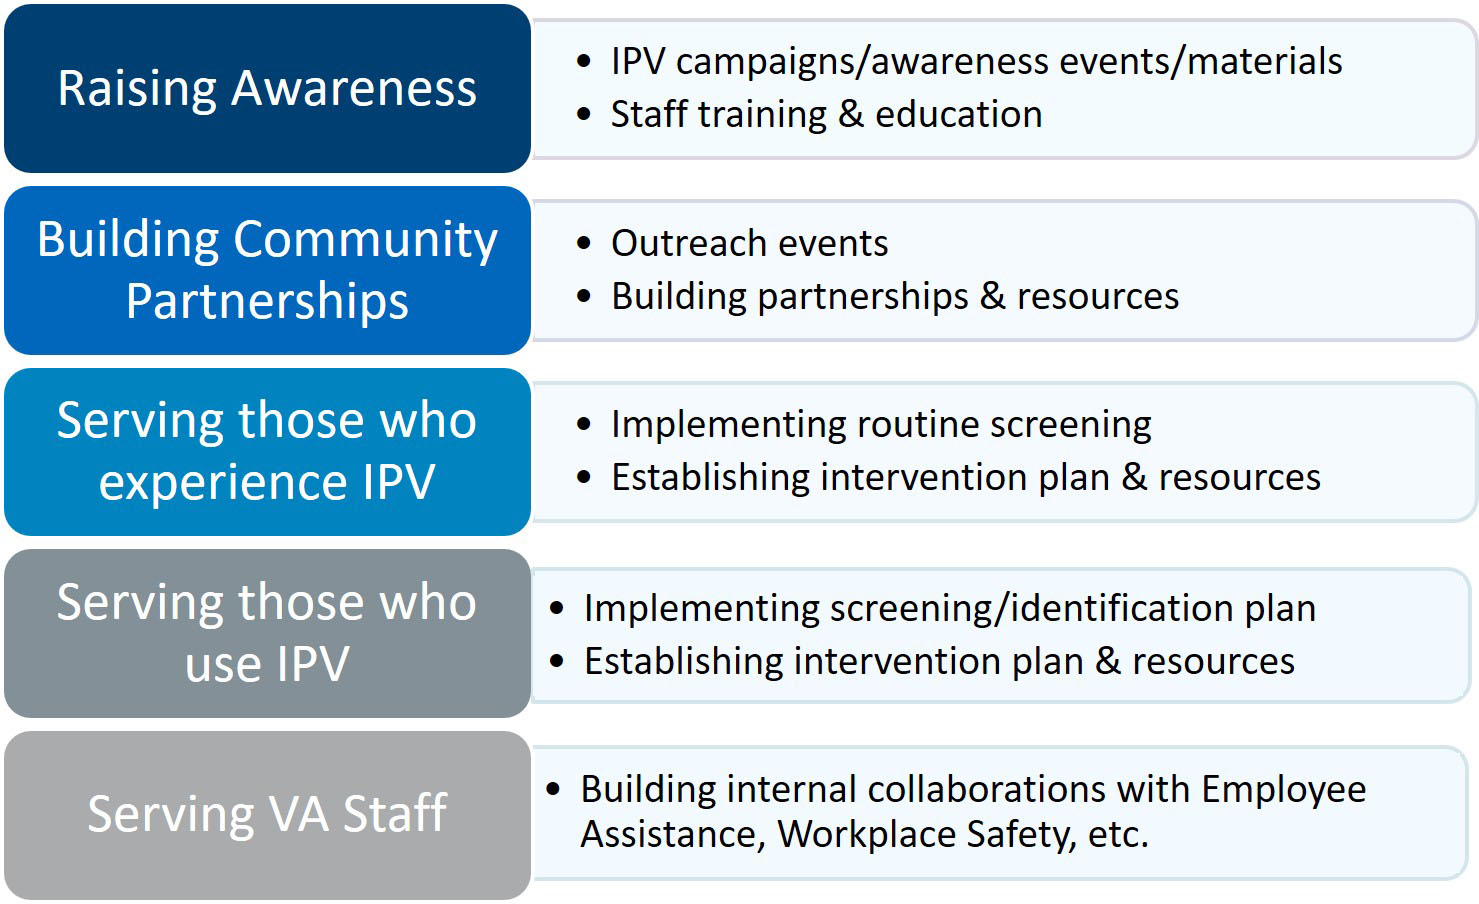 /SOCIALWORK/IPV/images/five-key-Action-Areas.jpg